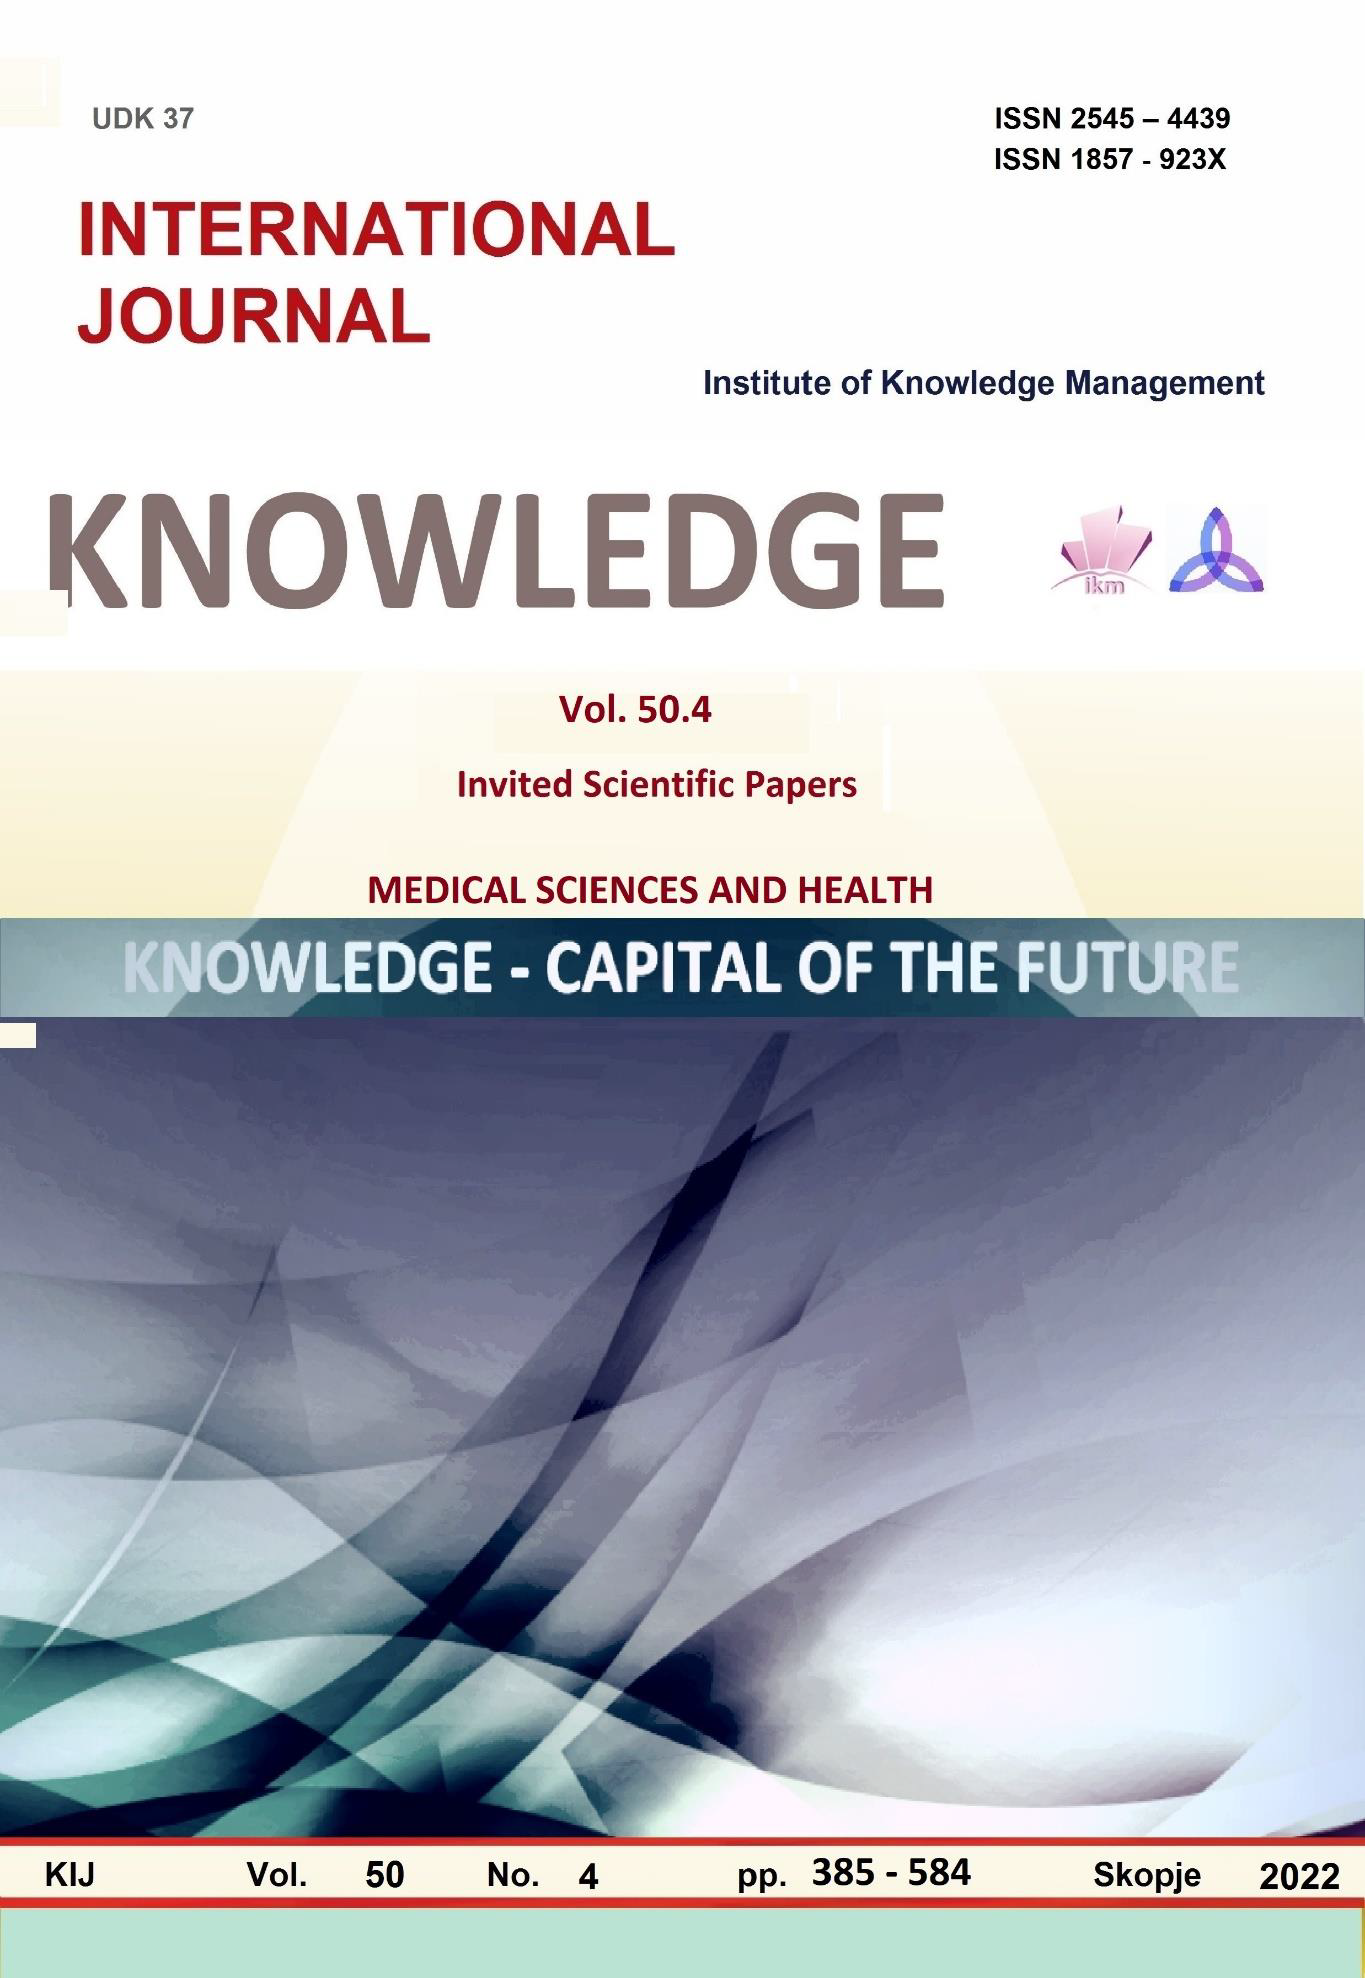 					View Vol. 50 No. 4 (2022): Knowledge - Capital Of The Future
				